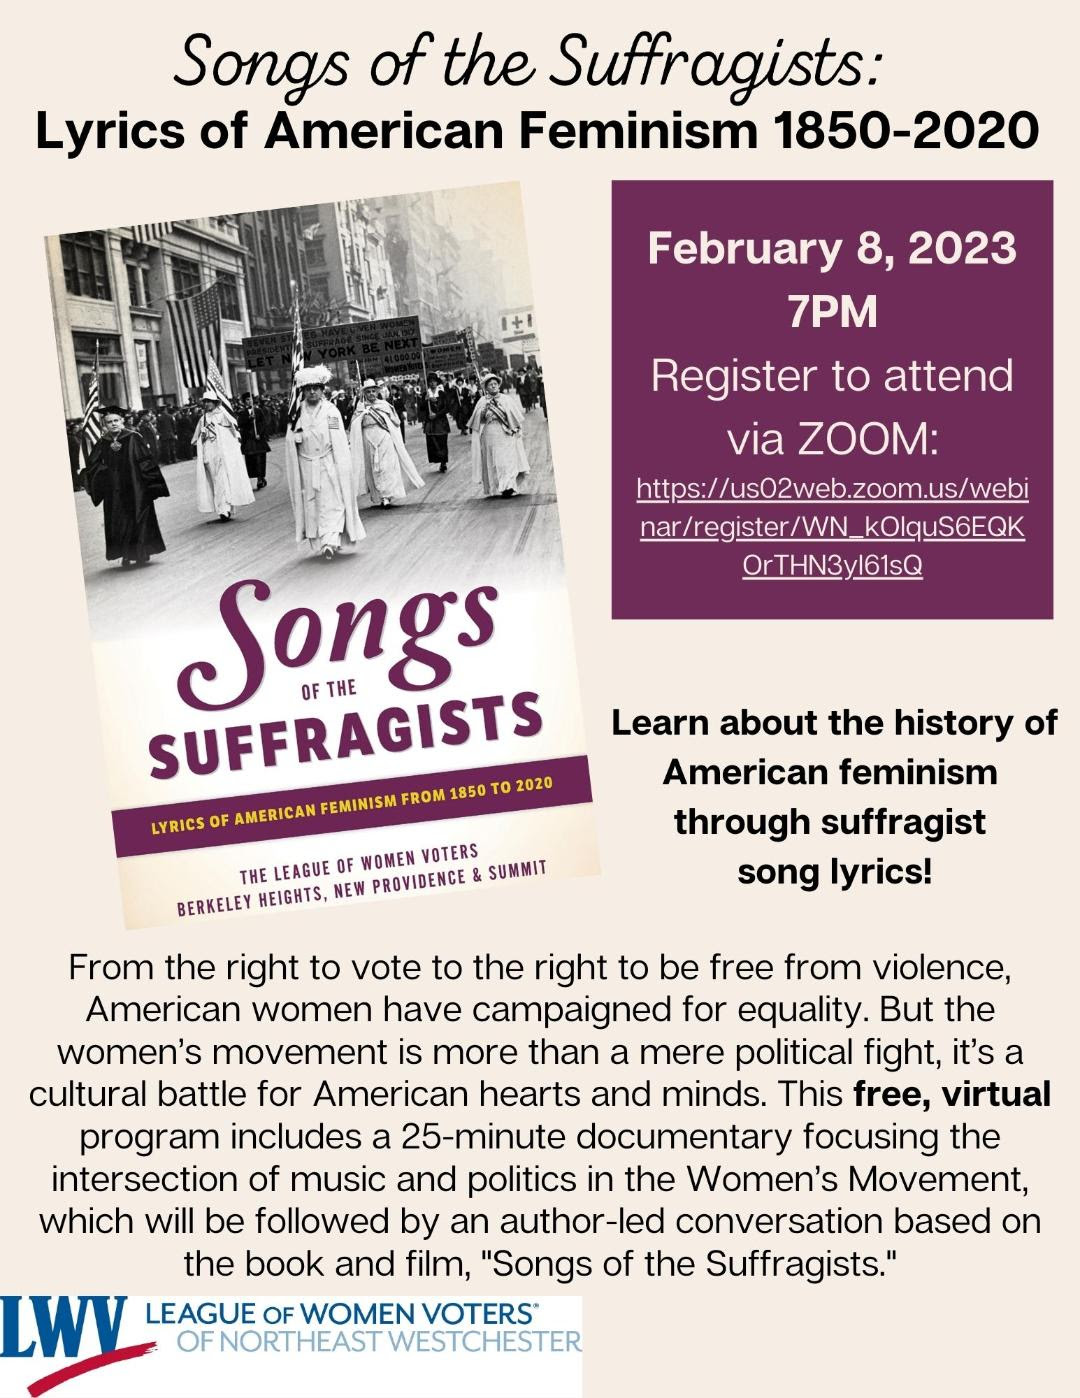 Songs of the Suffragists